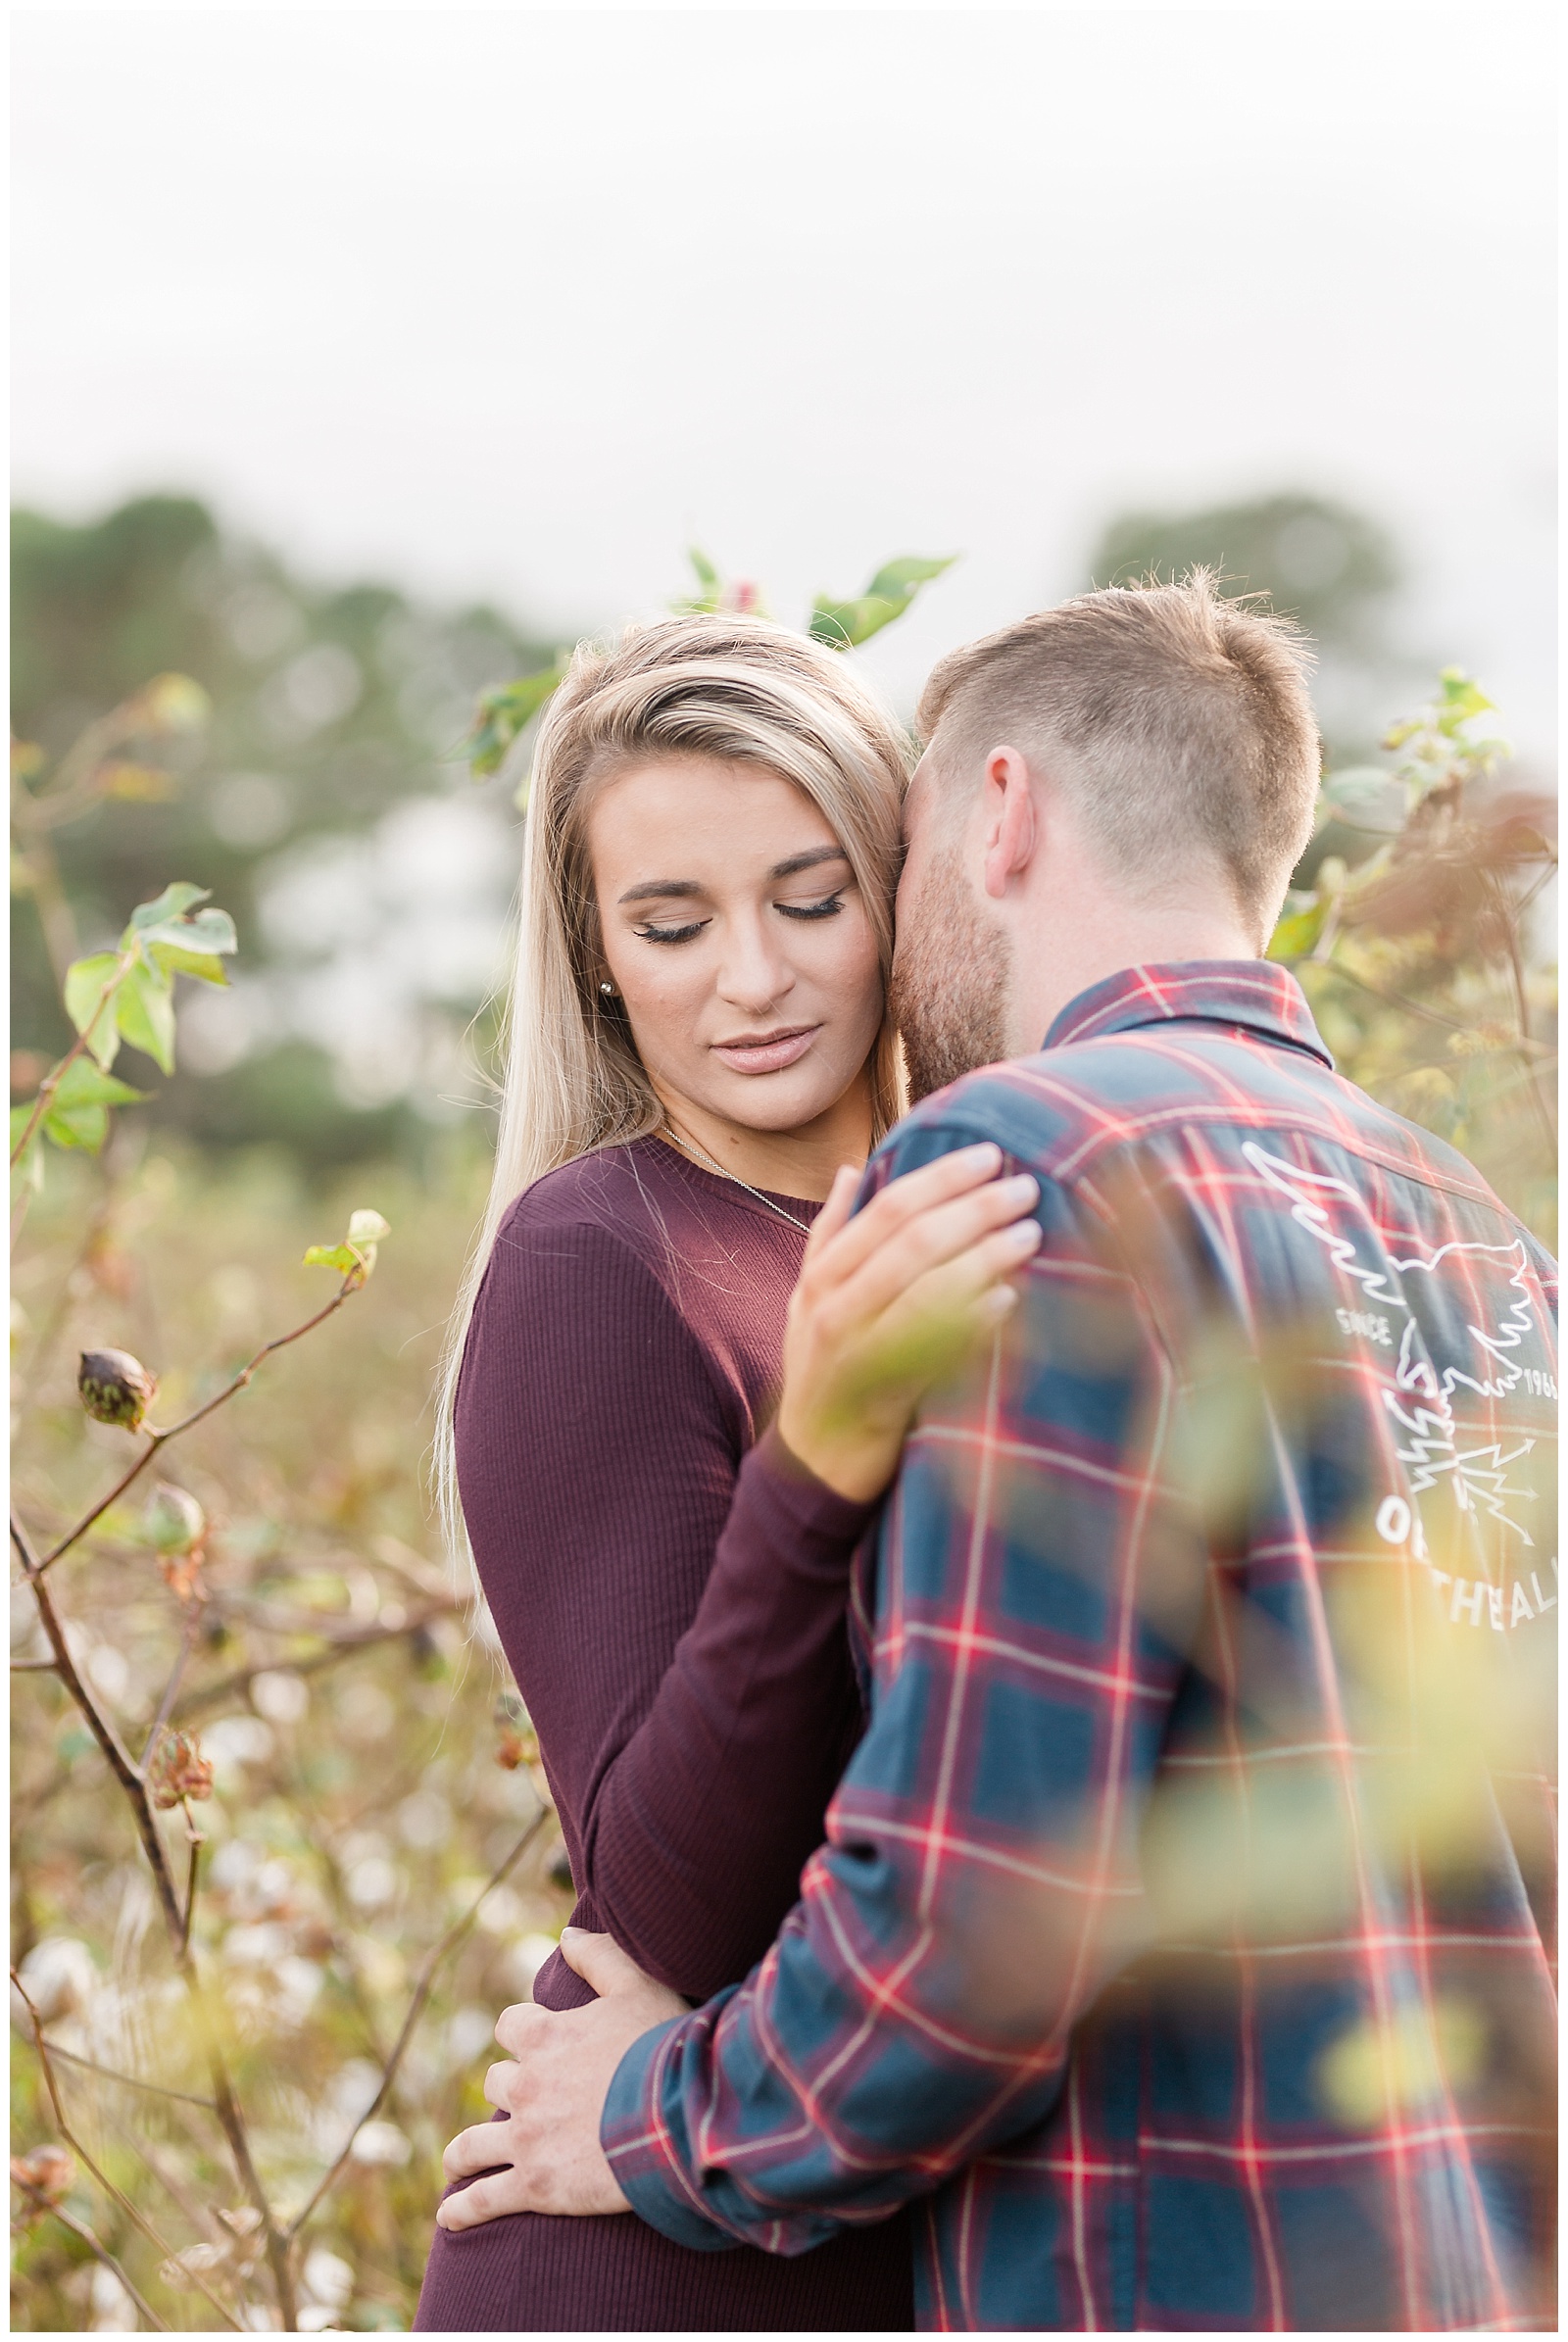 cullipher-farms-engagement-session-39.jpg